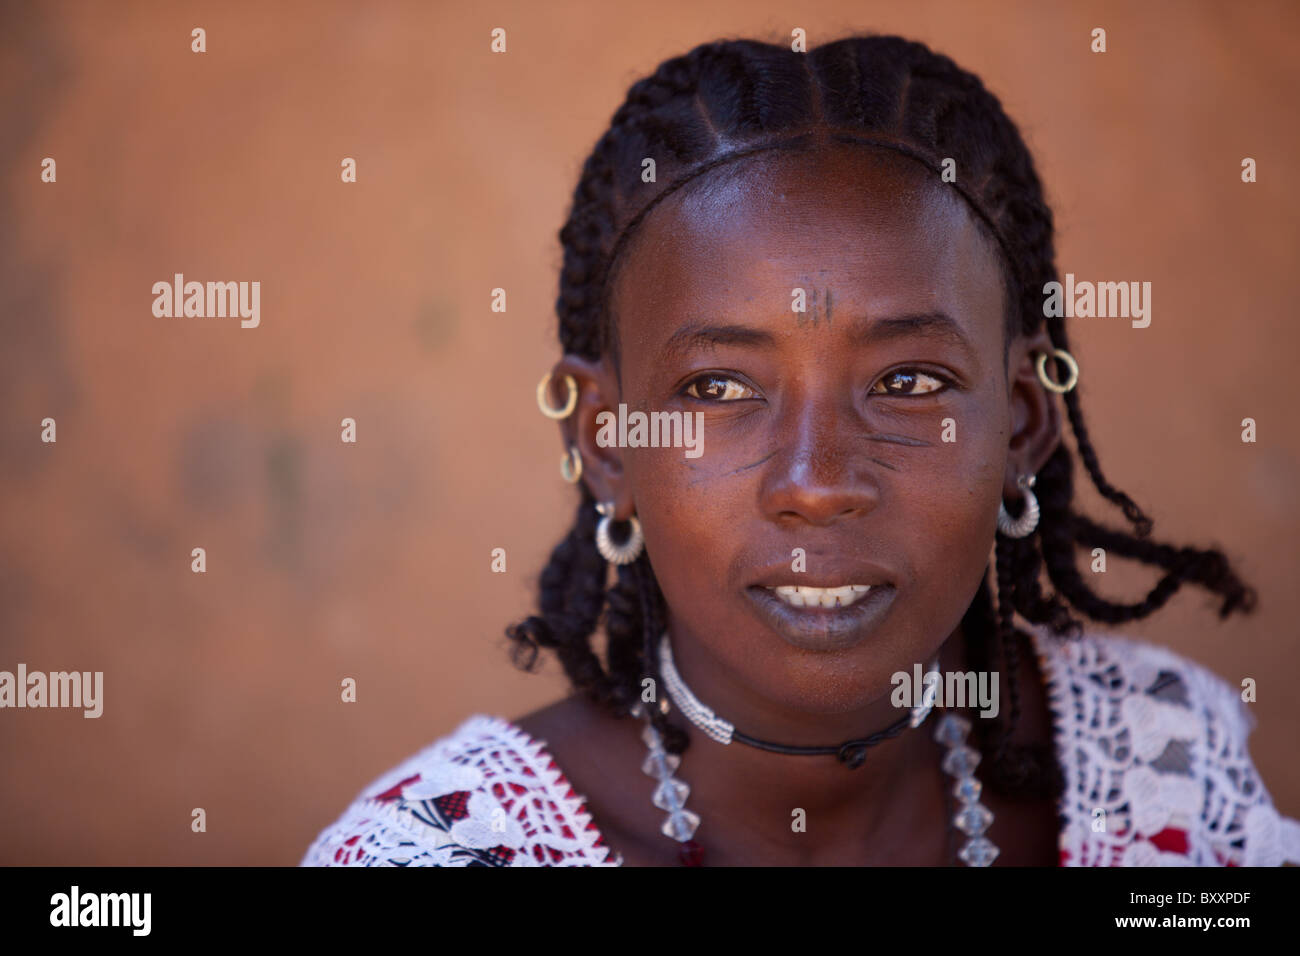 Fulani woman in Djibo in northern Burkina Faso. The woman sports the traditional facial scarring, that is considered beautiful. Stock Photo